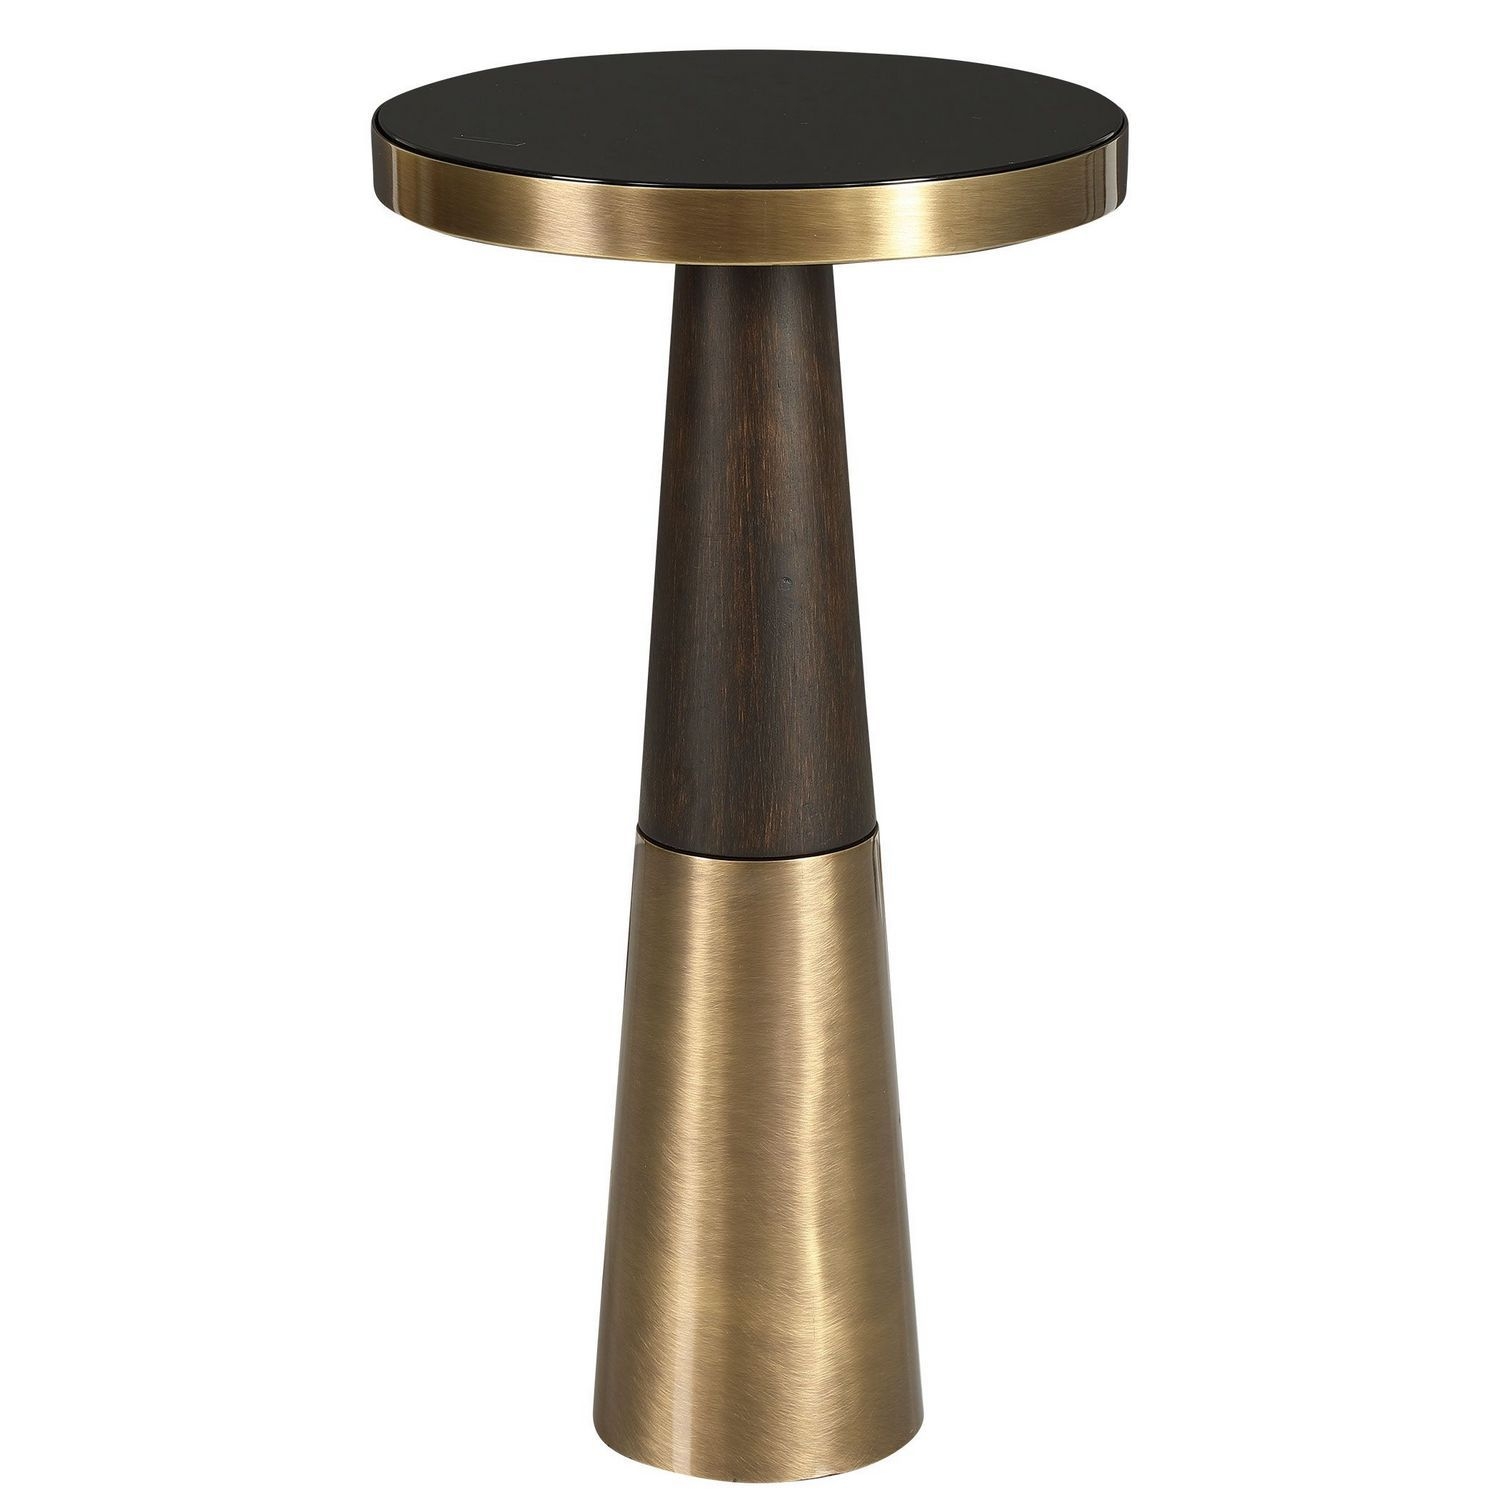 Uttermost Fortier Accent Table - Black